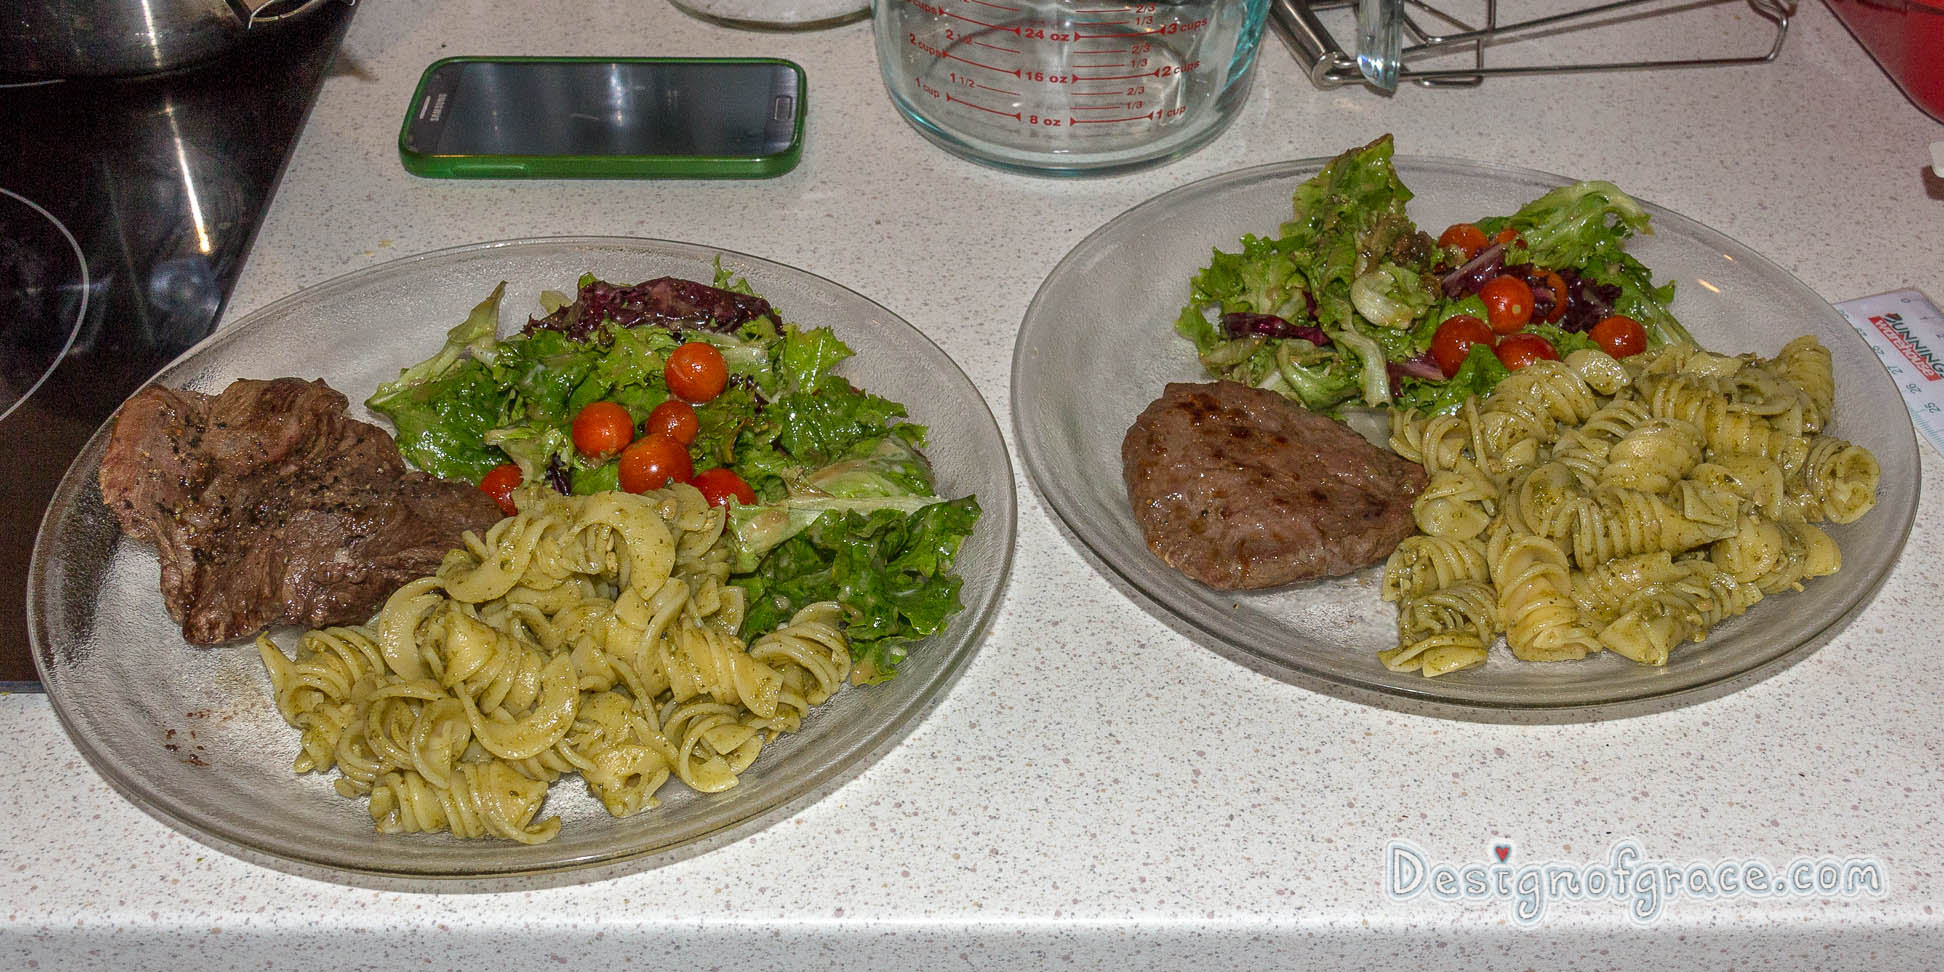 2 plate of food with the kangaroo steak on the left and the patty on the right with pesto pasta and salad.